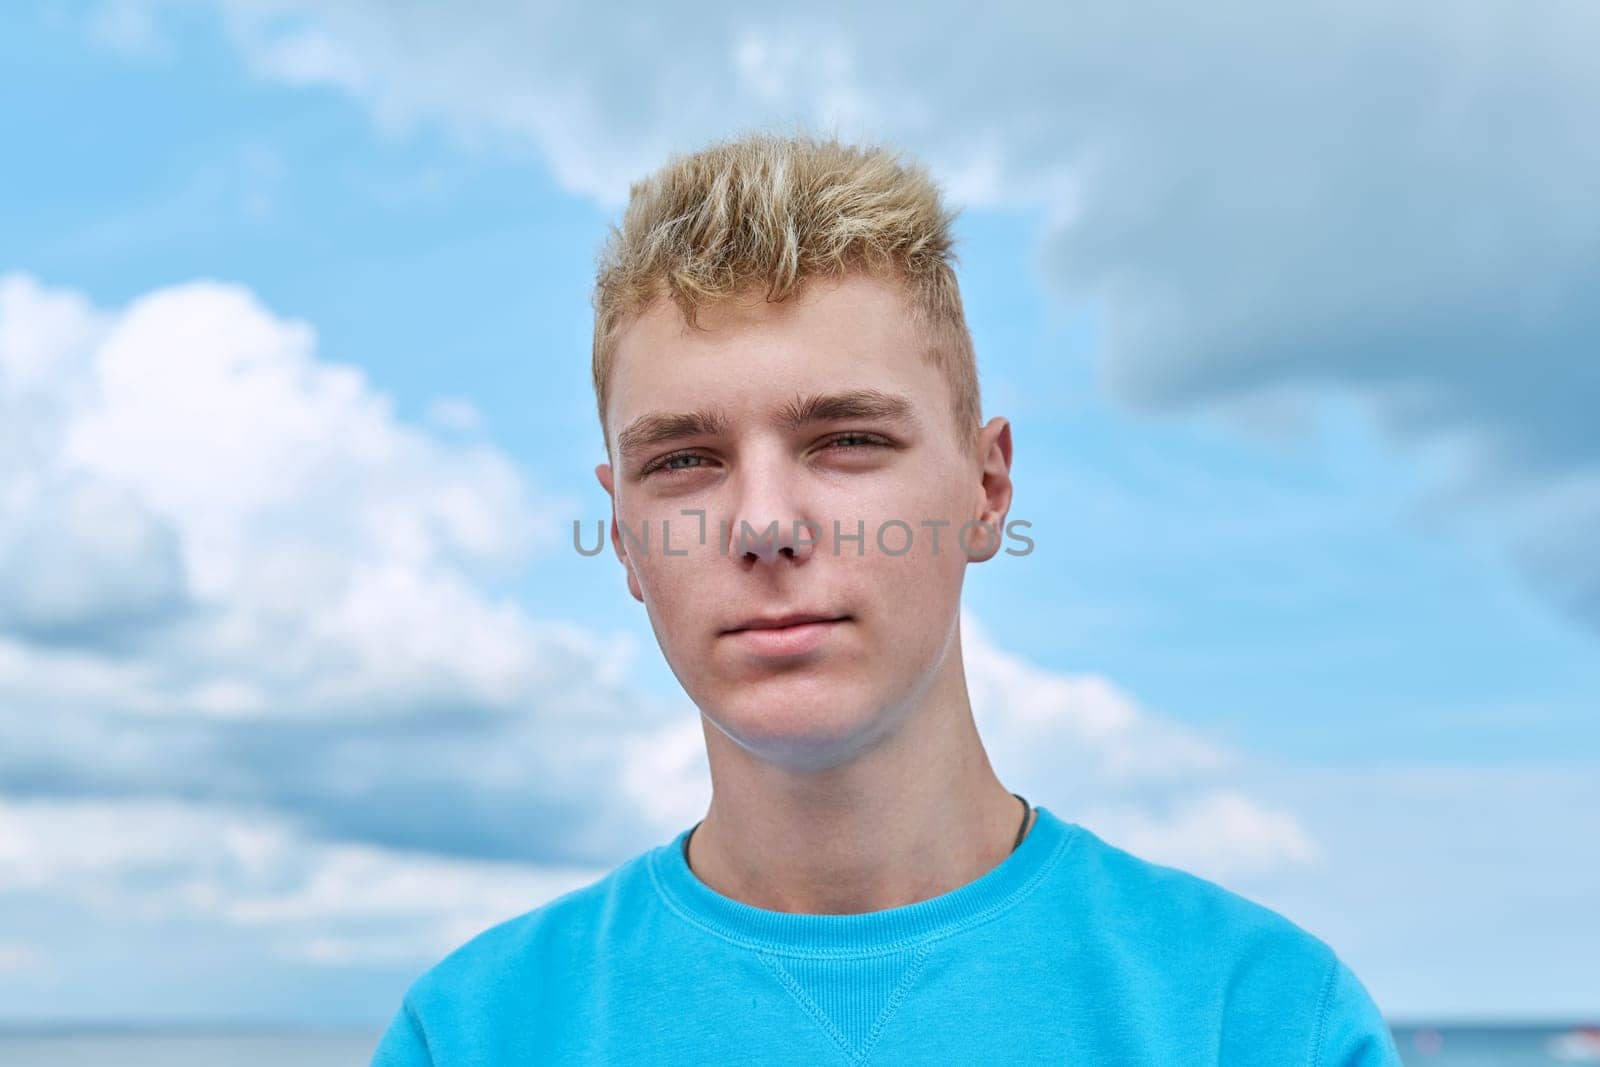 Headshot portrait of handsome smiling teenage guy, face of positive young male against blue sky in clouds. Youth, 18, 19, 20 years of age, lifestyle, enjoy fun, holiday vacation, outdoor